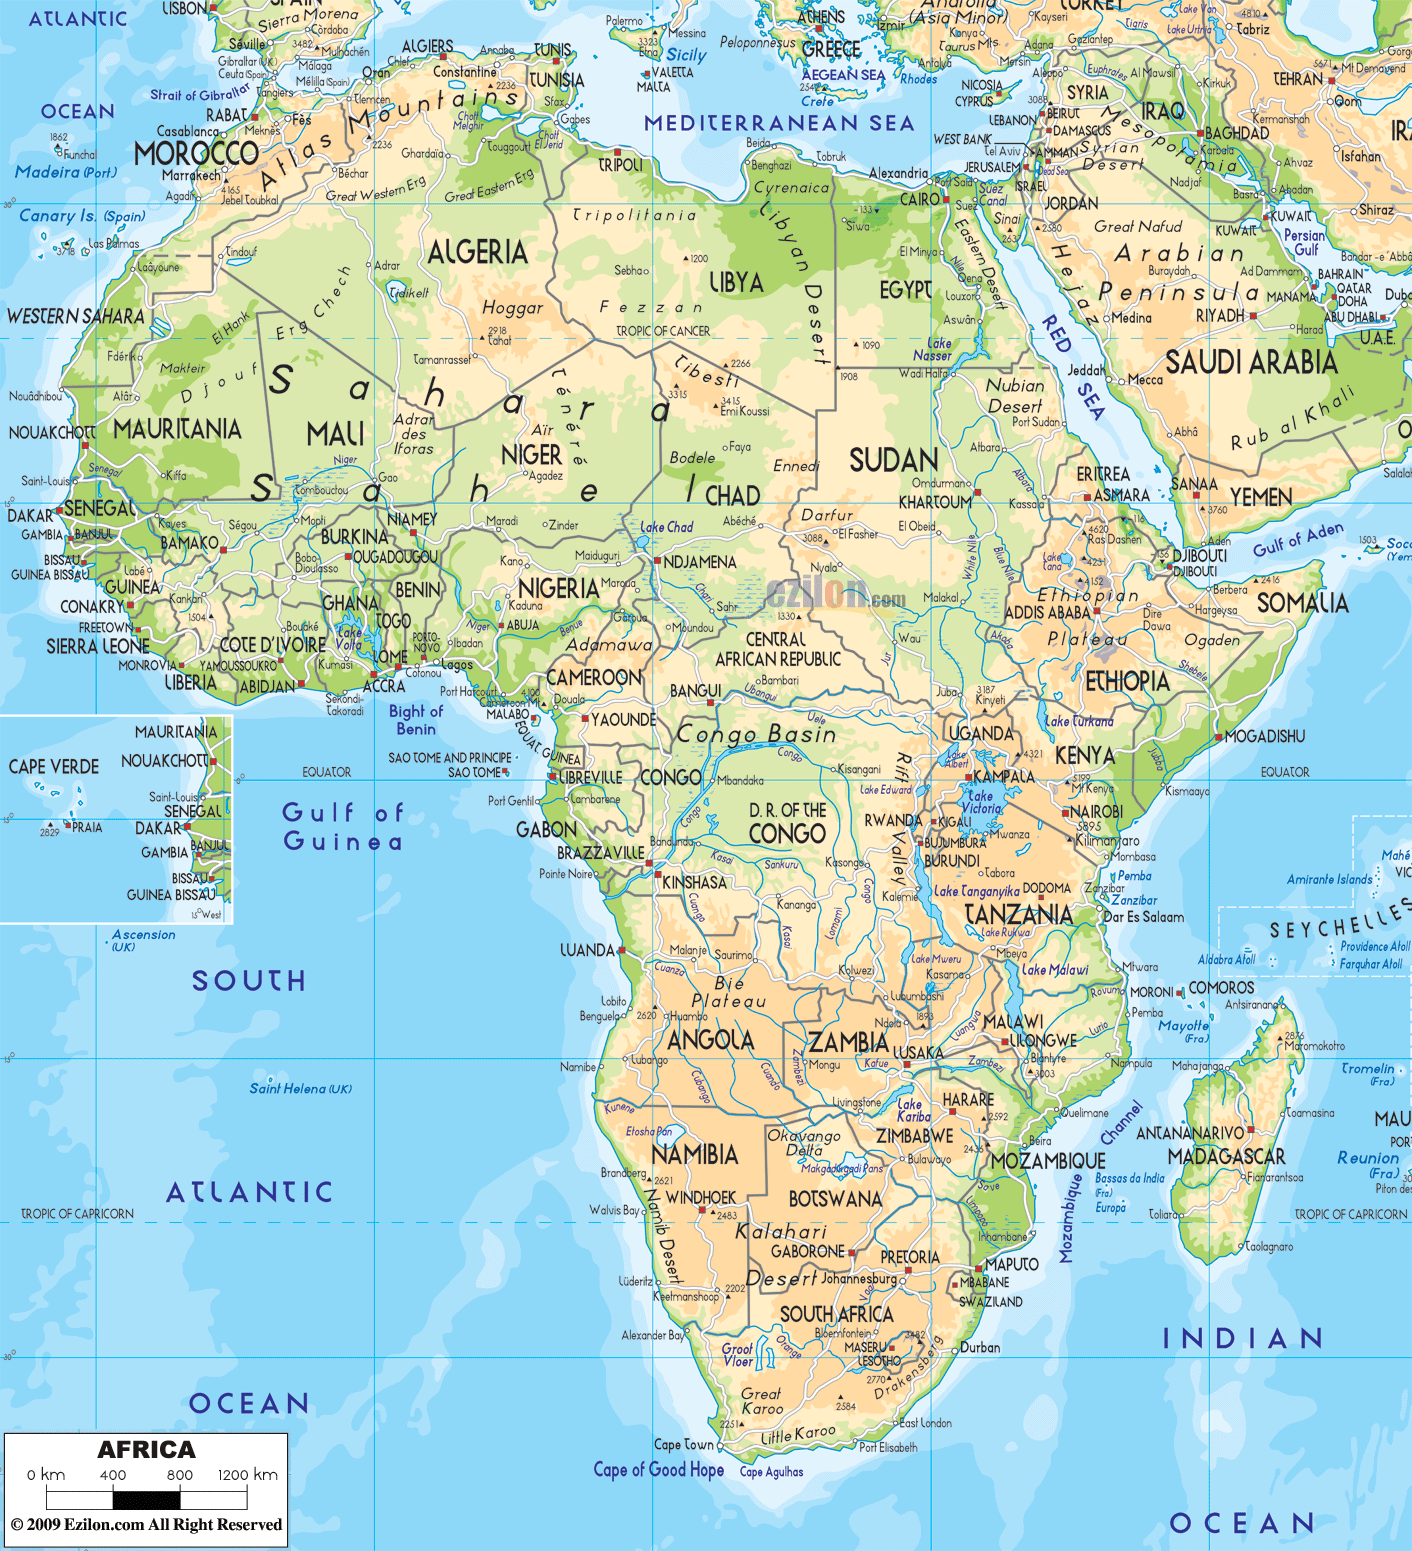 Africa Physical Map 